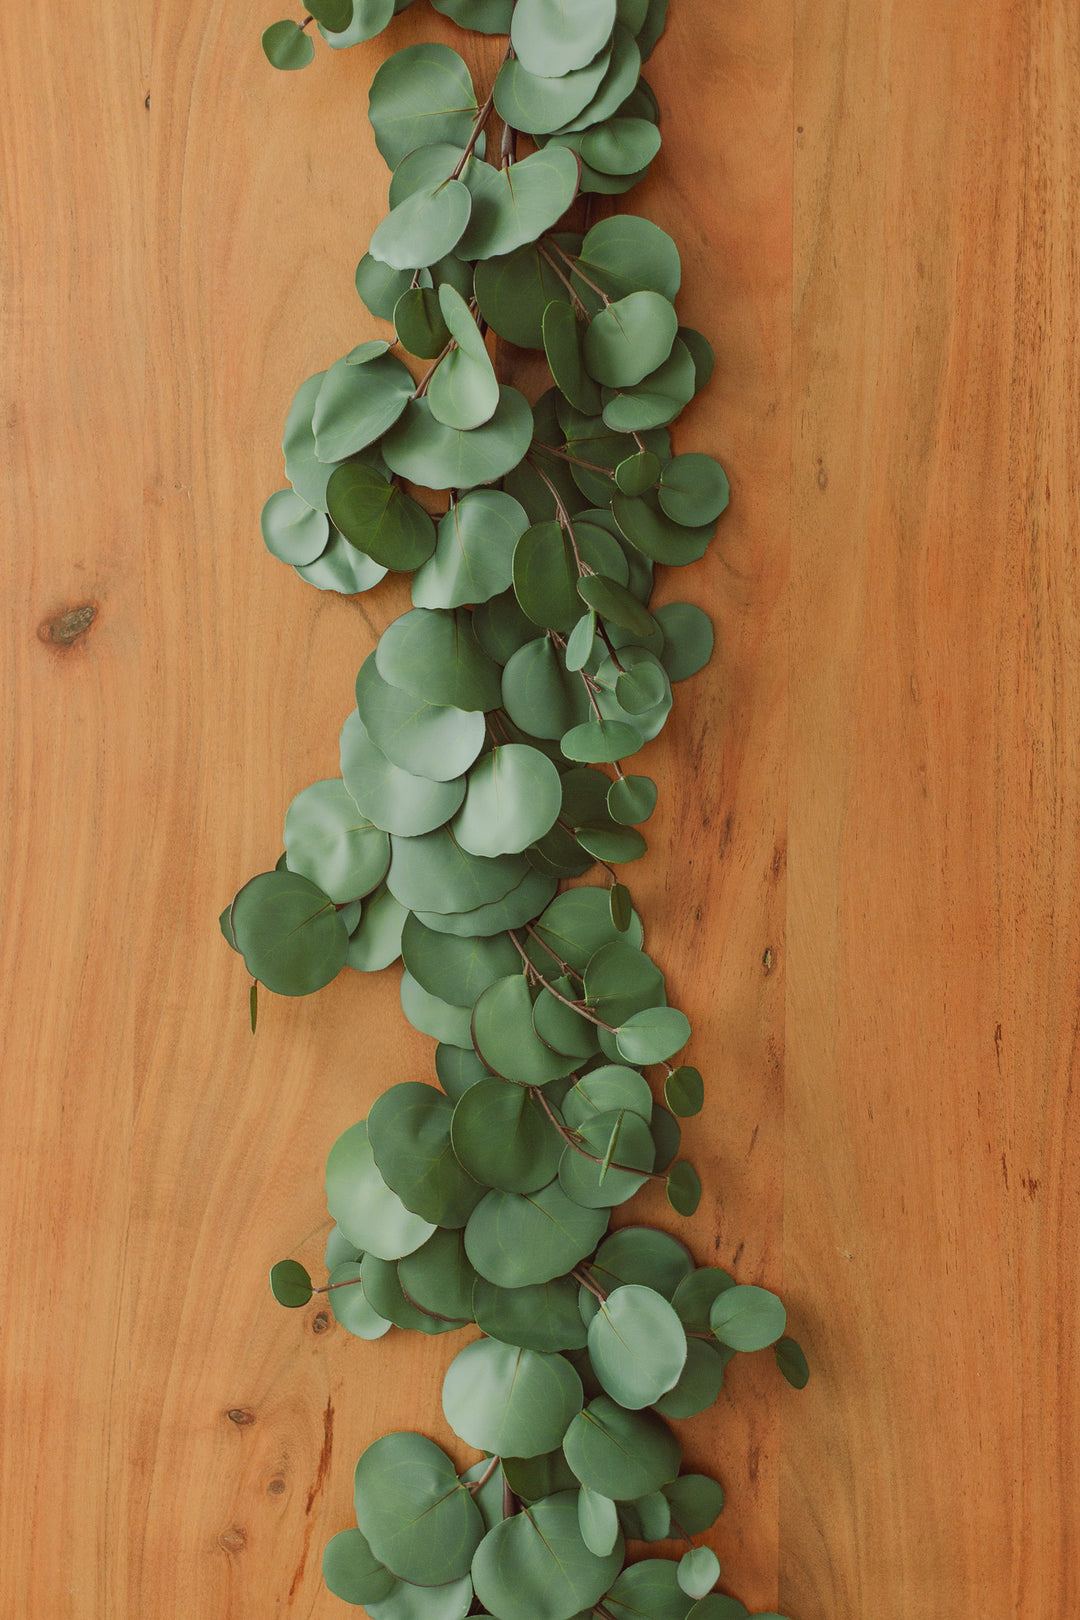 This is the most realistic artificial eucalyptus garland, customized to be exclusive to Eucalypt Co. Your wedding guests will be wowed. 